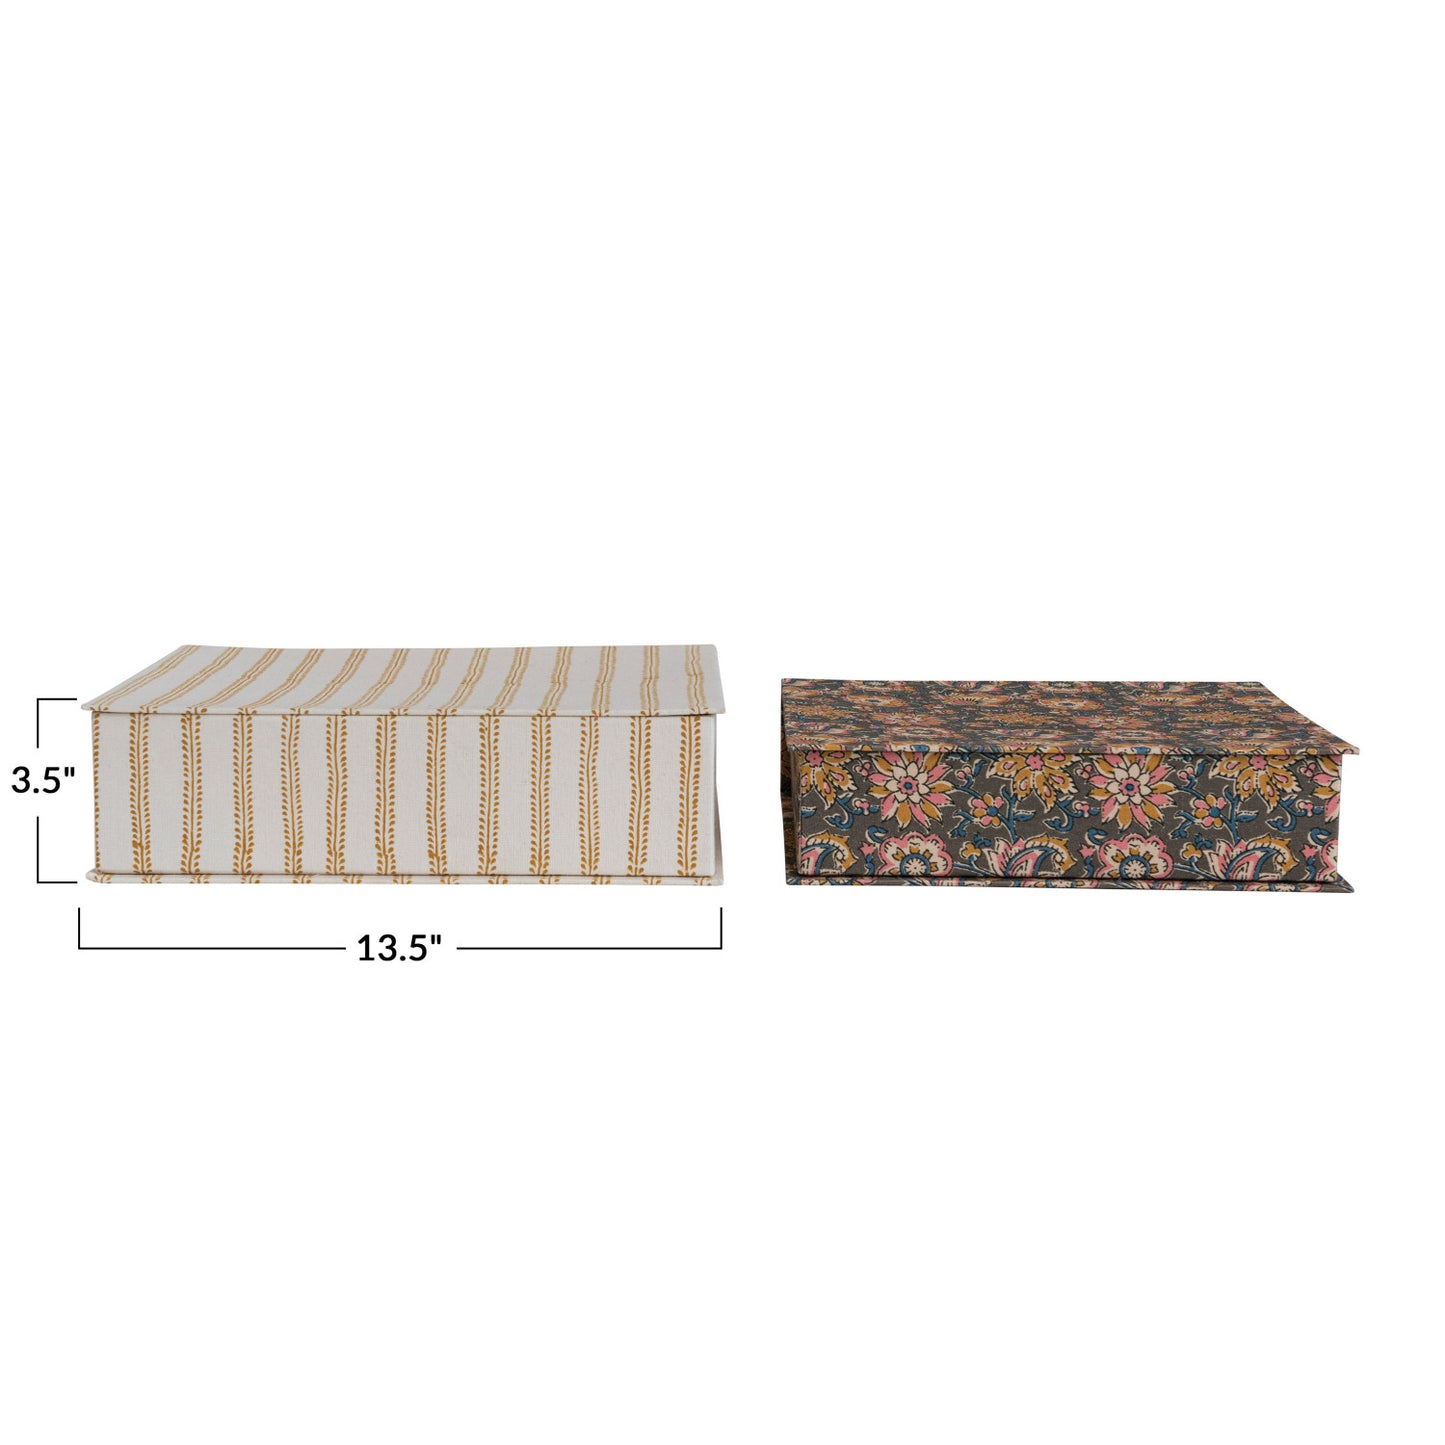 Fabric Covered Boxes w/ Striped/Floral Pattern Set of 2